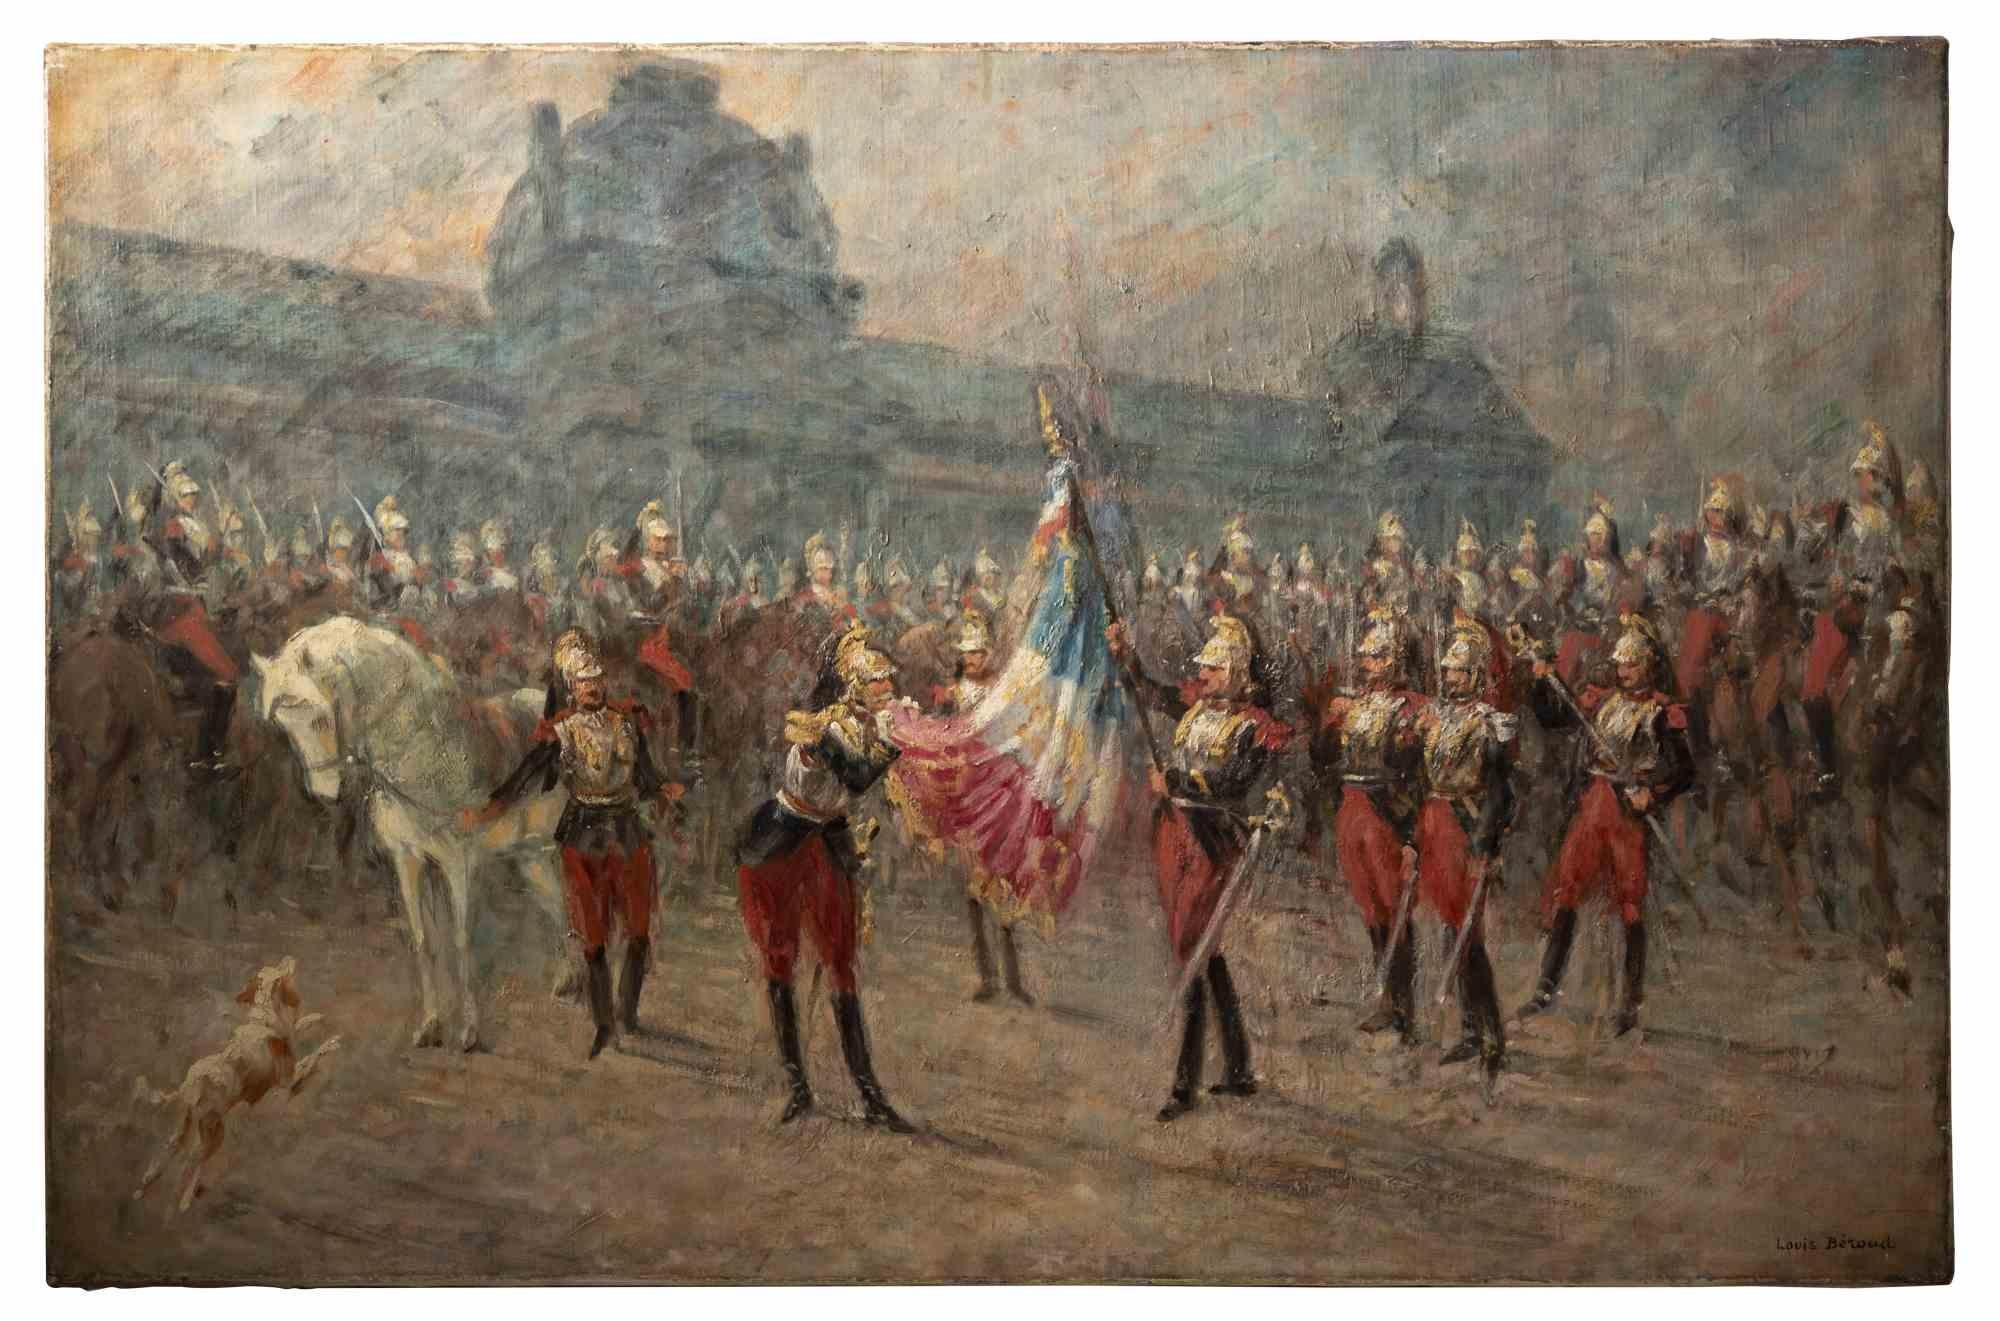 Louis Beraud Figurative Painting - Ceremony of the Cuirassiers -Painting by L. Beraud - Early 20th Century